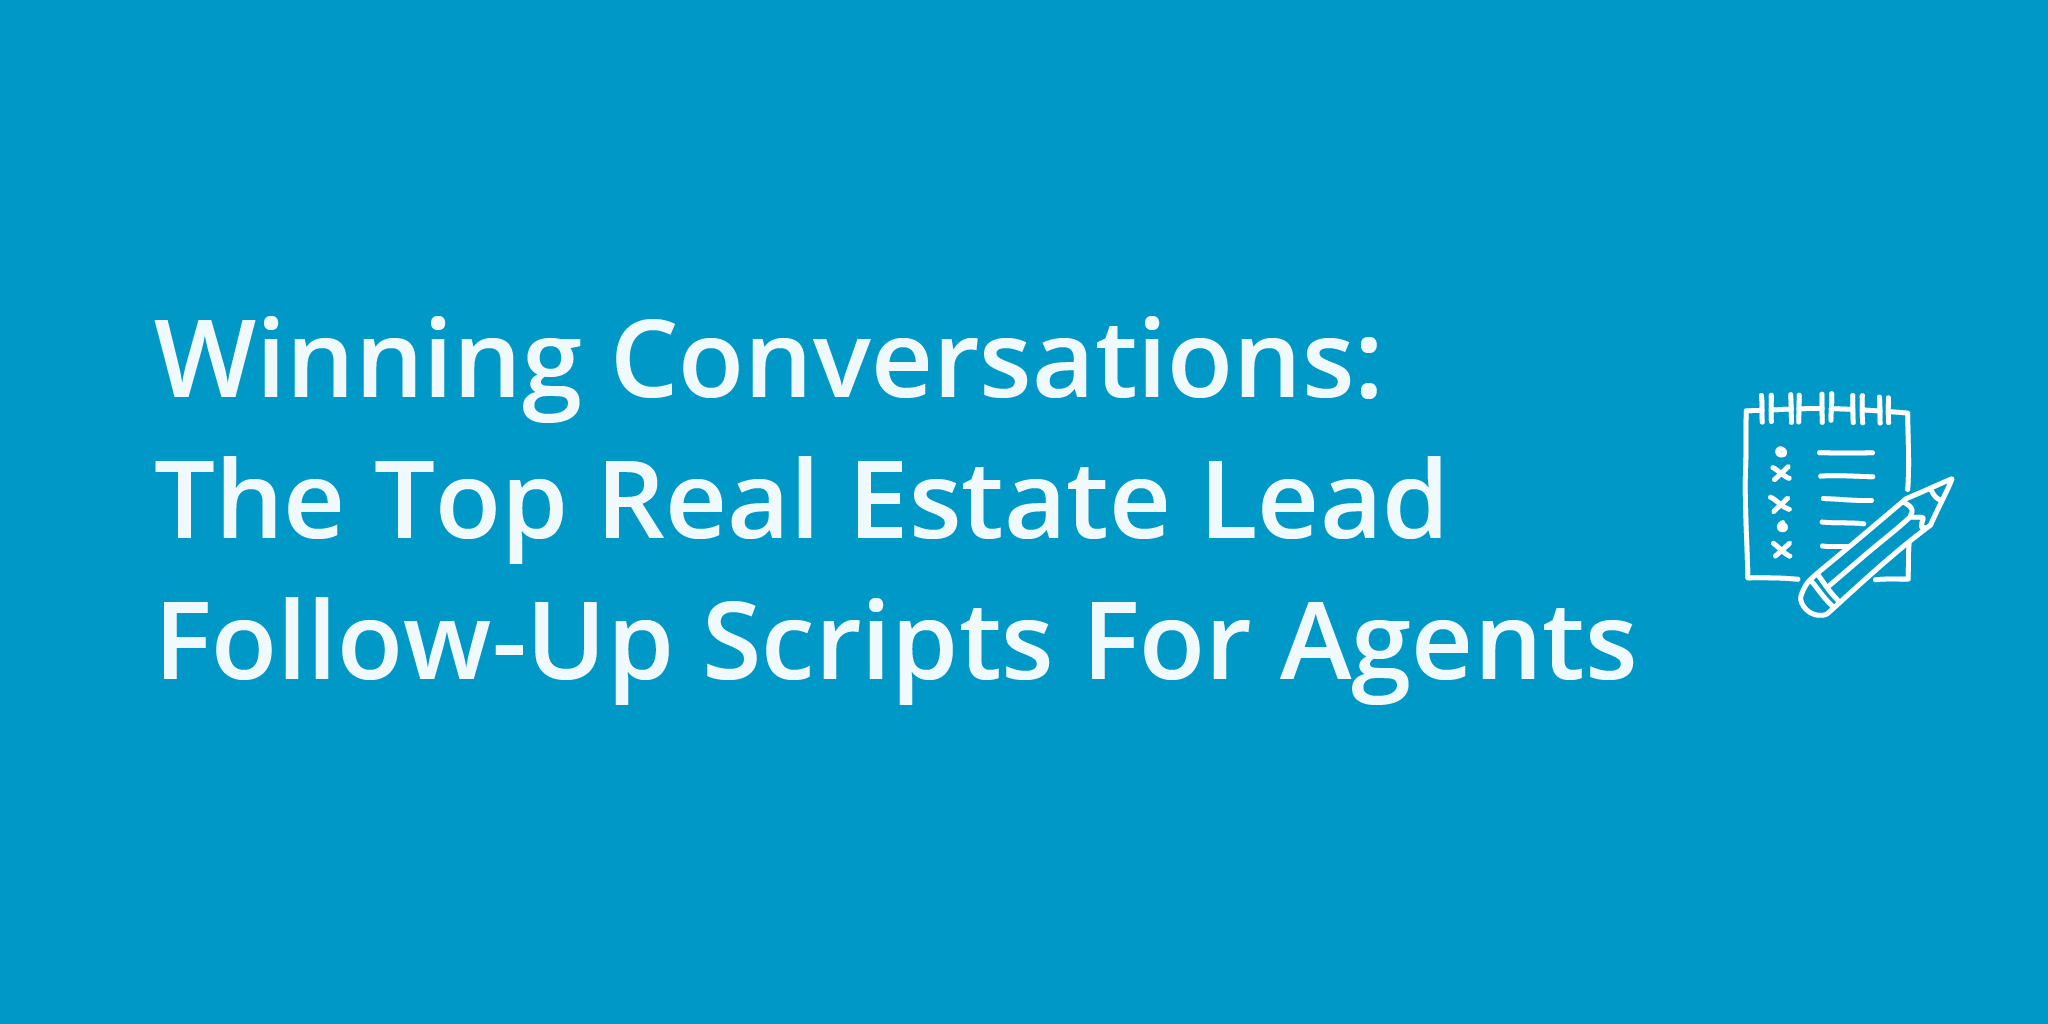 Winning Conversations: The Top Real Estate Lead Follow-Up Scripts For Agents